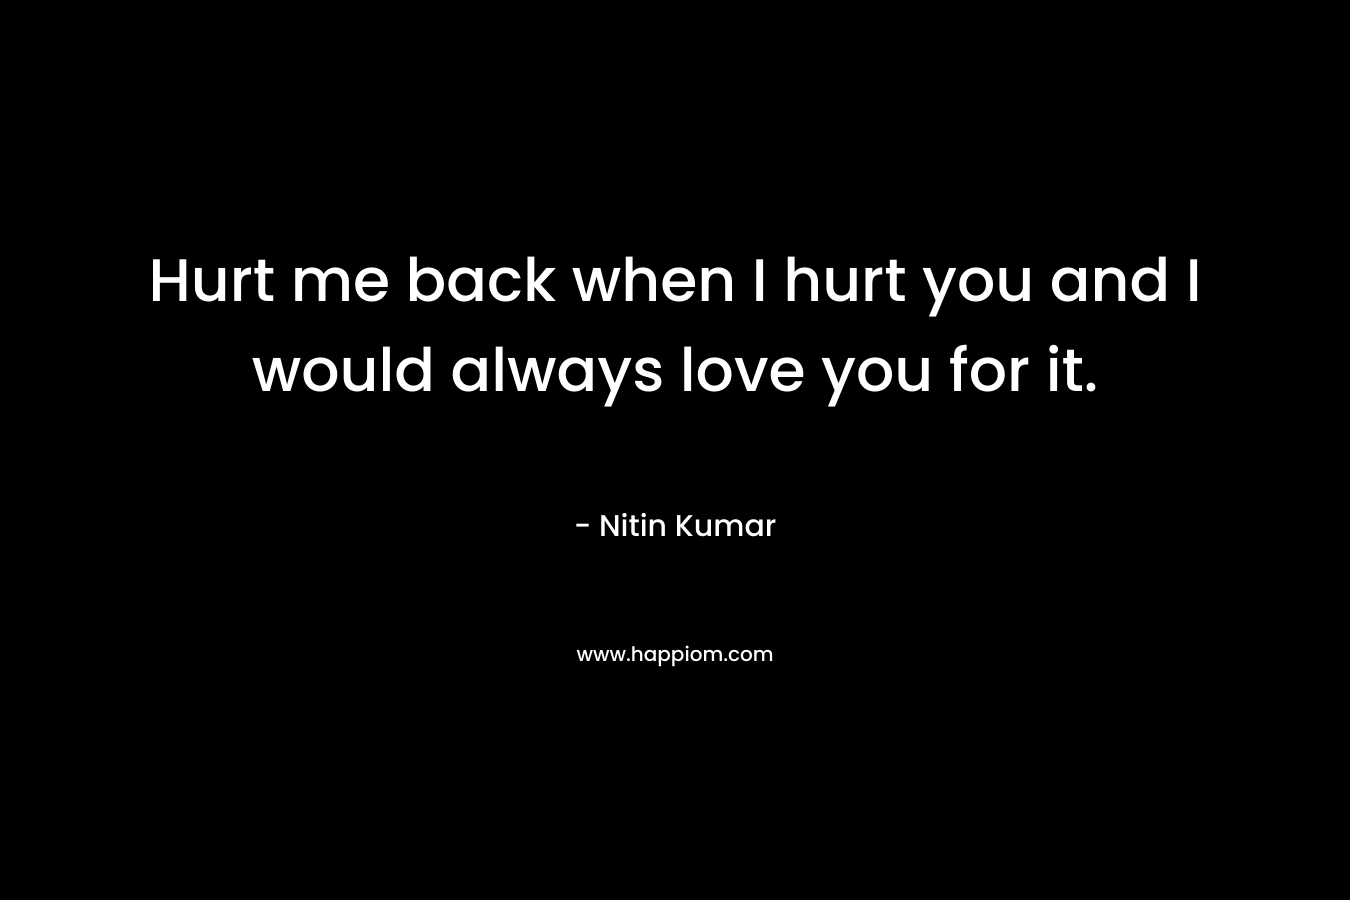 Hurt me back when I hurt you and I would always love you for it.